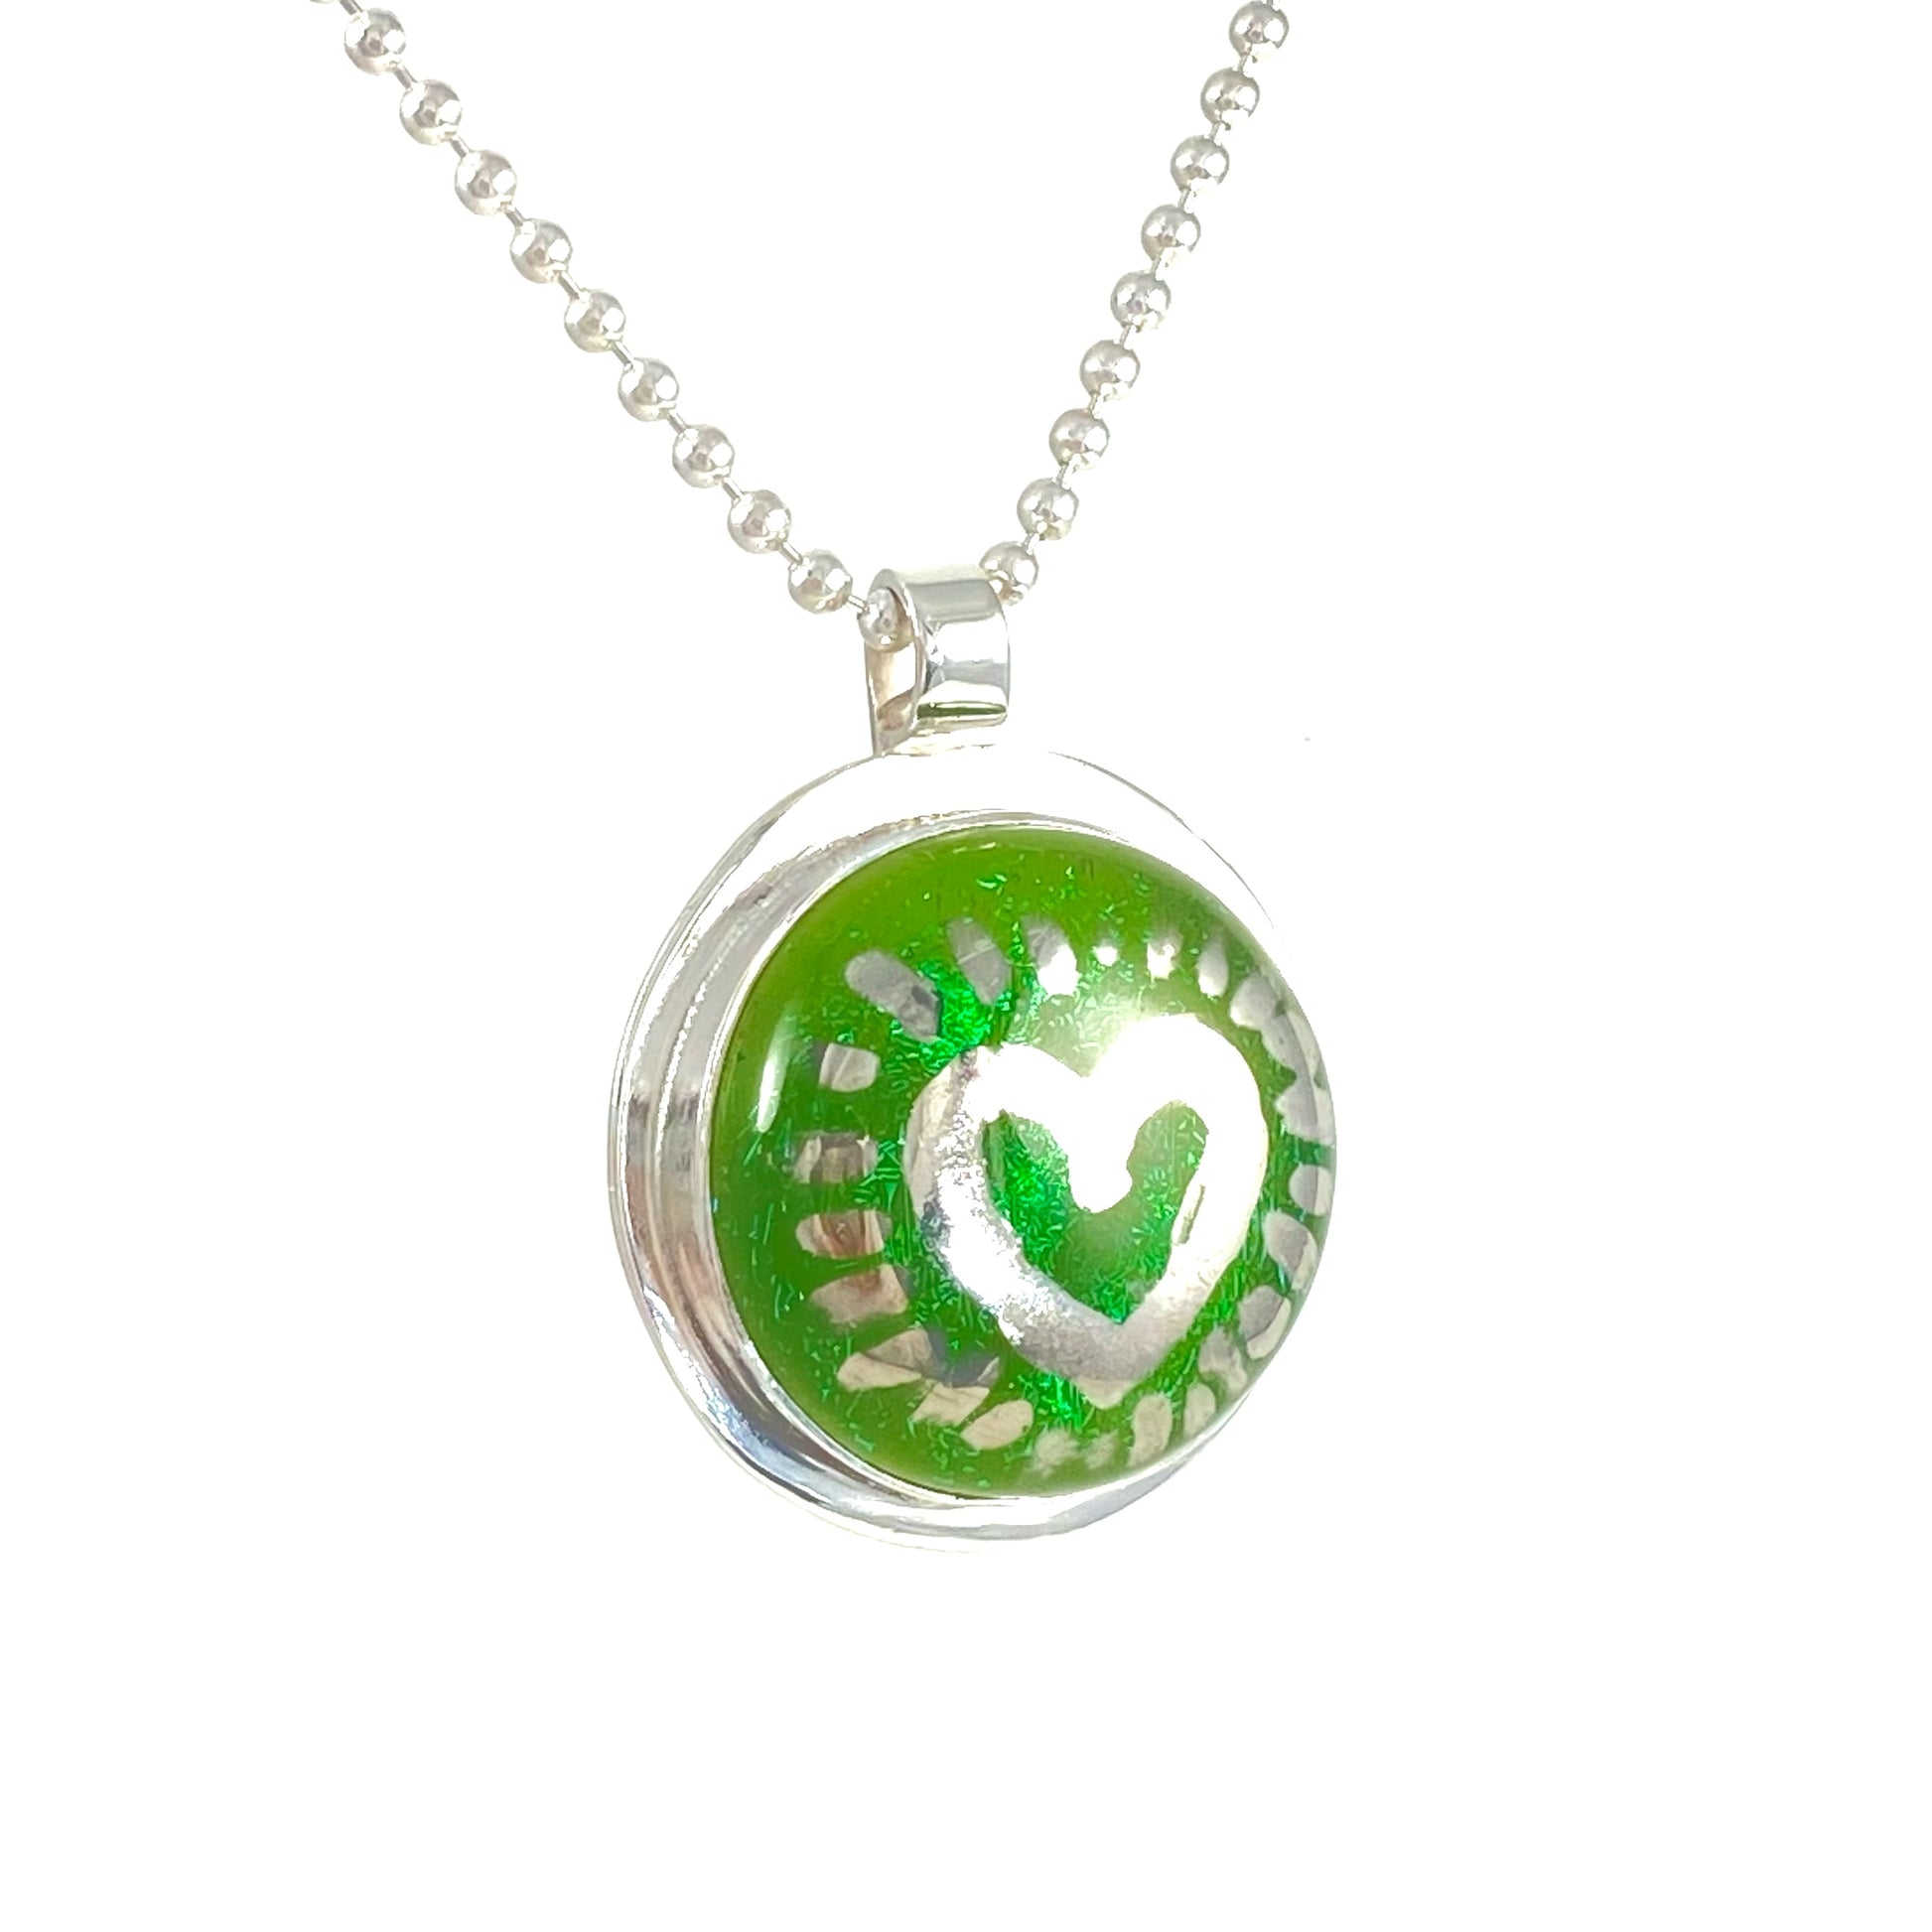 Silver luster painted heart over green necklace, fused glass, glass jewelry, glass and silver jewelry, handmade, handcrafted, American Craft, hand fabricated jewelry, hand fabricated jewellery,  Athen, Georgia, colorful jewelry, sparkle, bullseye glass, dichroic glass, art jewelry  